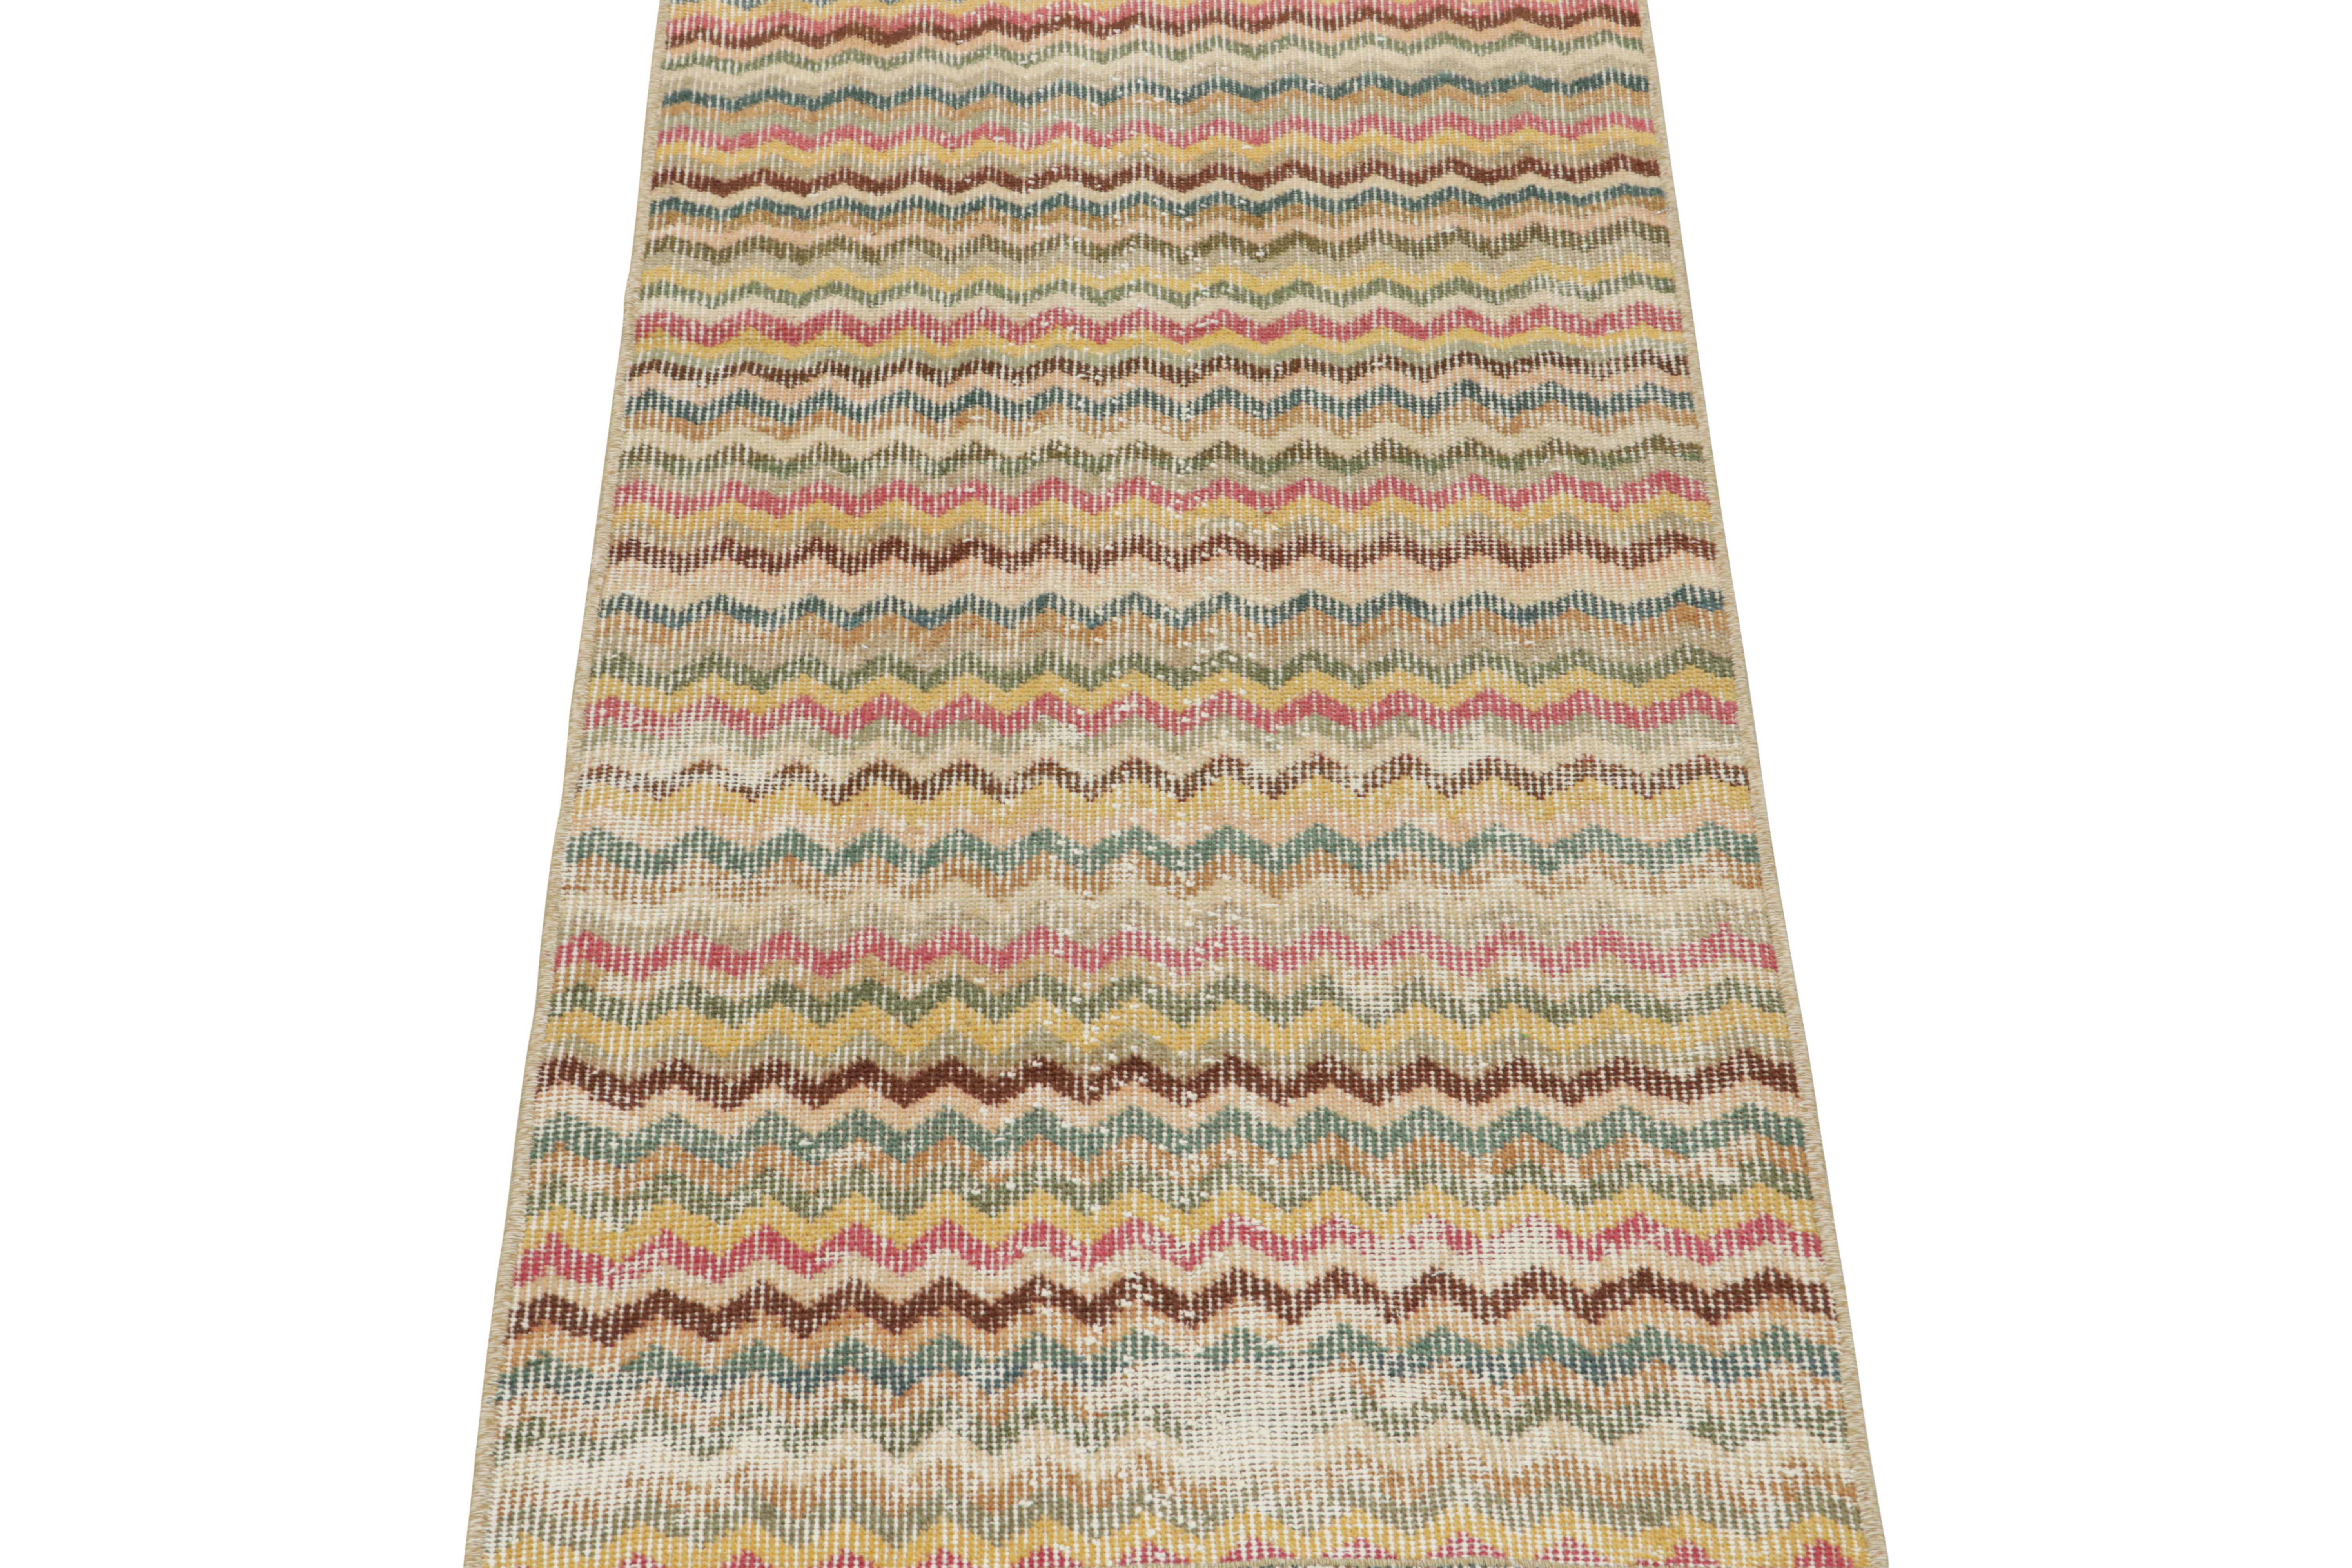 This vintage 2x5 runner is a new addition to Rug & Kilim’s midcentury Pasha Collection. This line is a commemoration, with rare curations we believe to hail from multidisciplinary Turkish designer Zeki Müren.

Further on the Design:

This